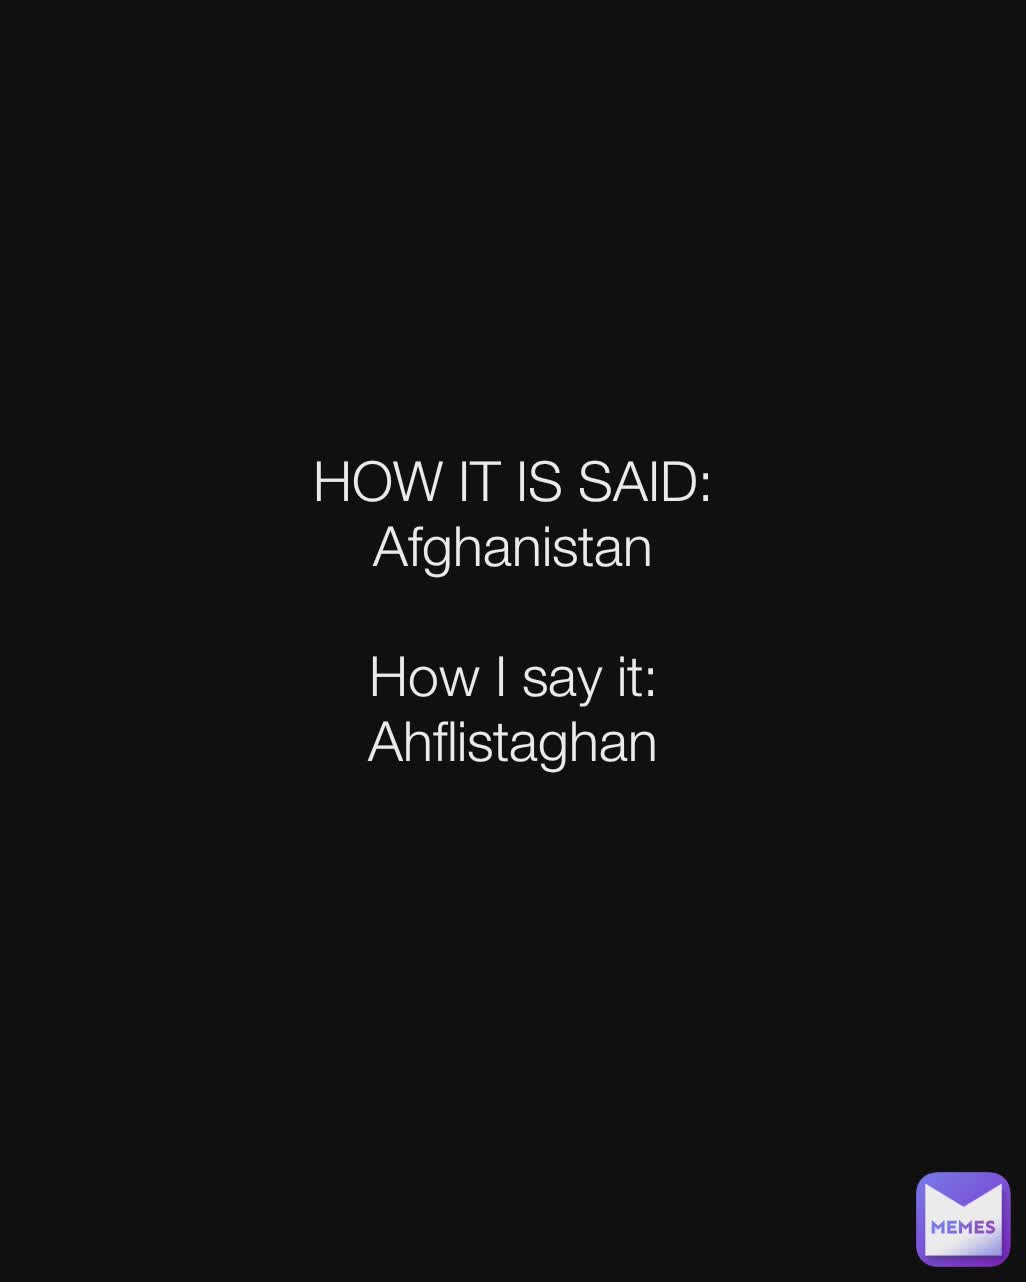 HOW IT IS SAID:
Afghanistan

How I say it:
Ahflistaghan
